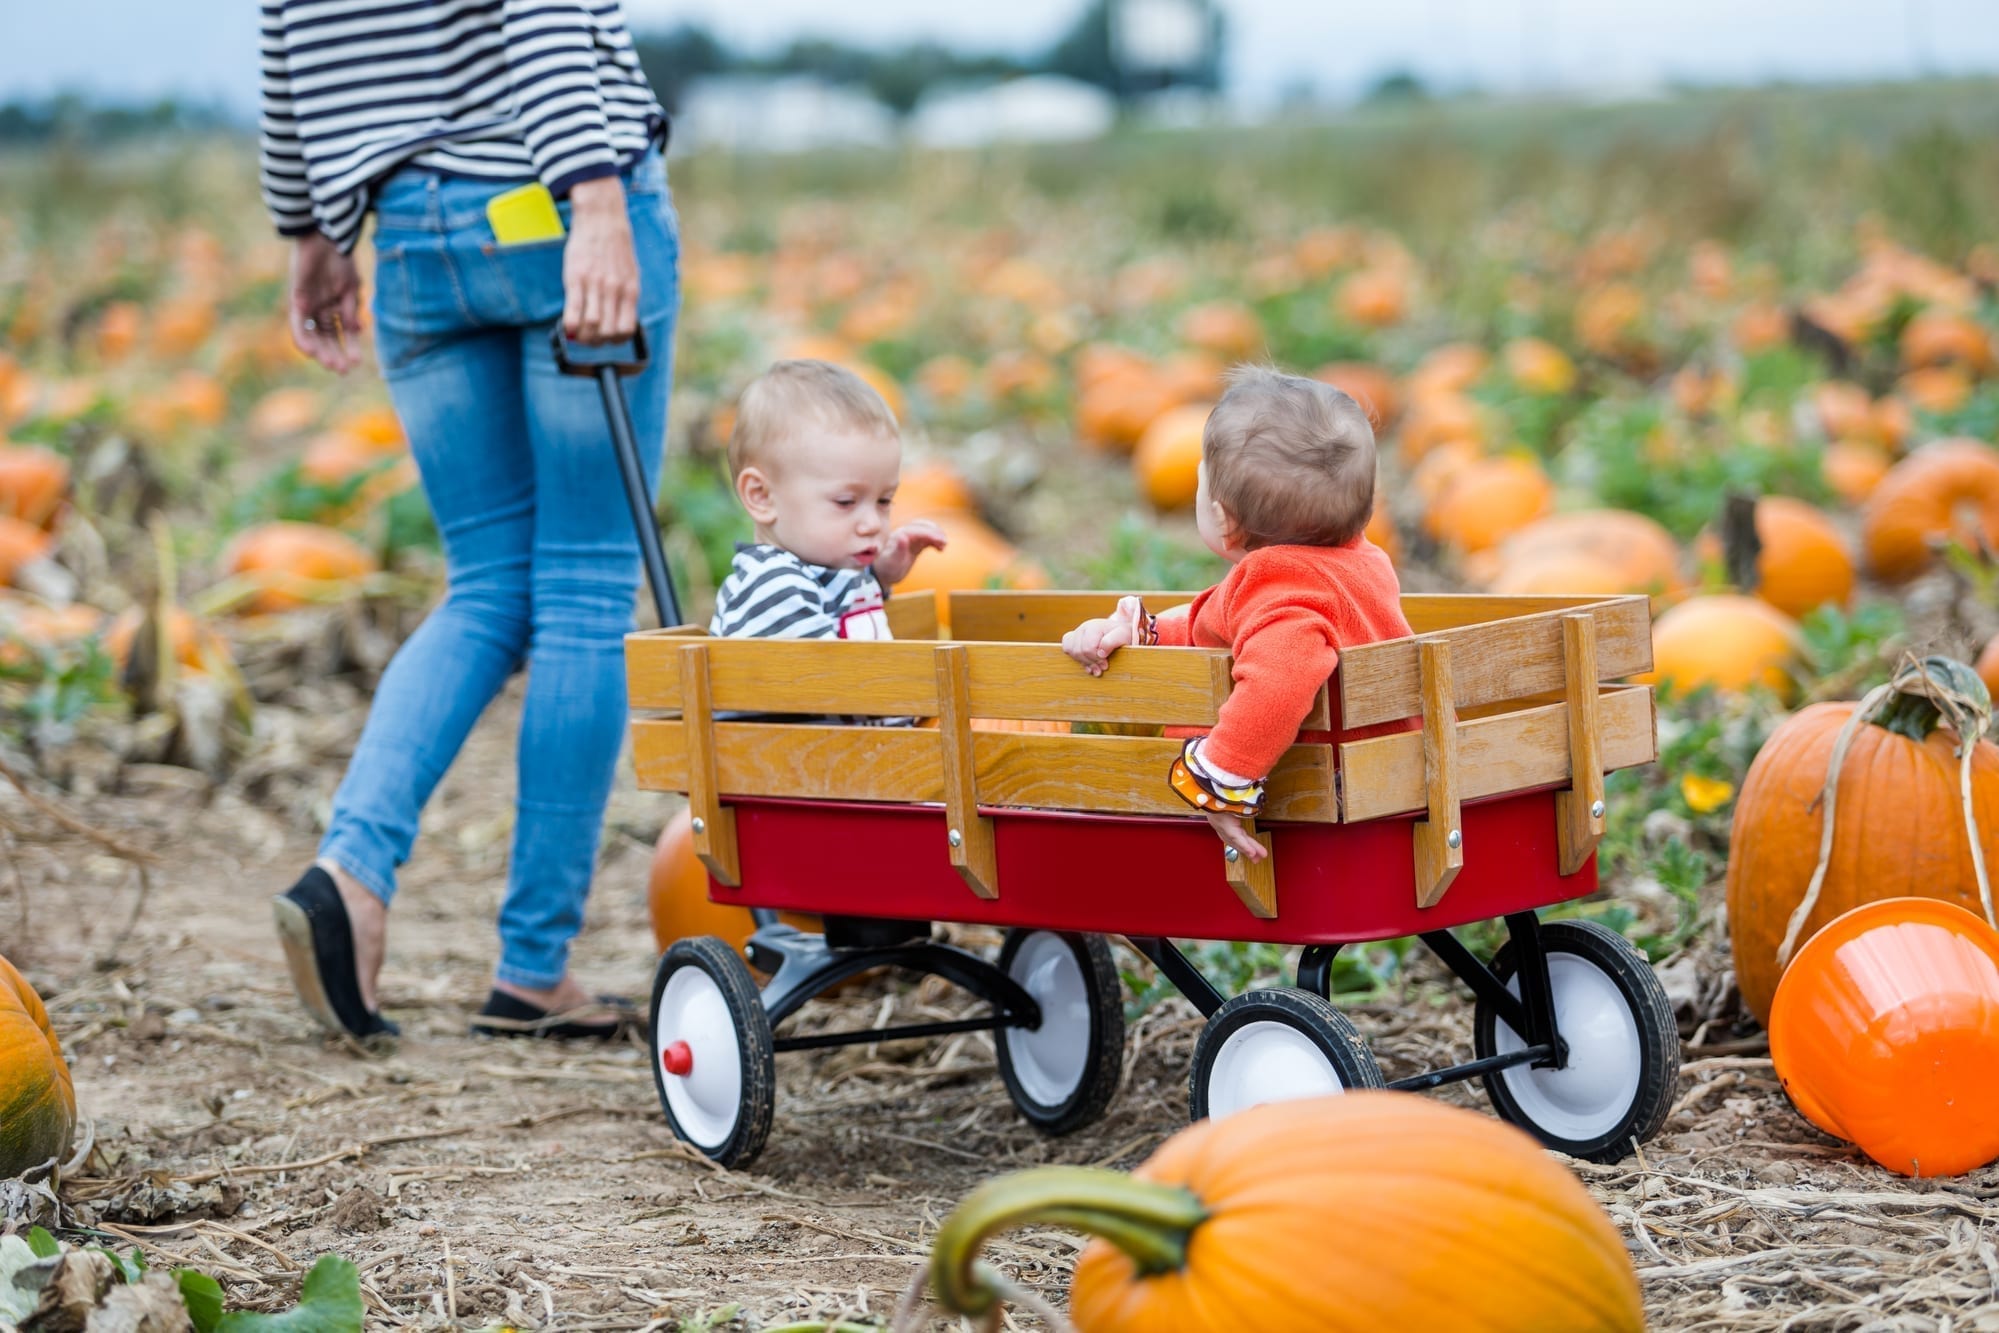 Must-Do Fall Activities for Kids in Overland Park, KS